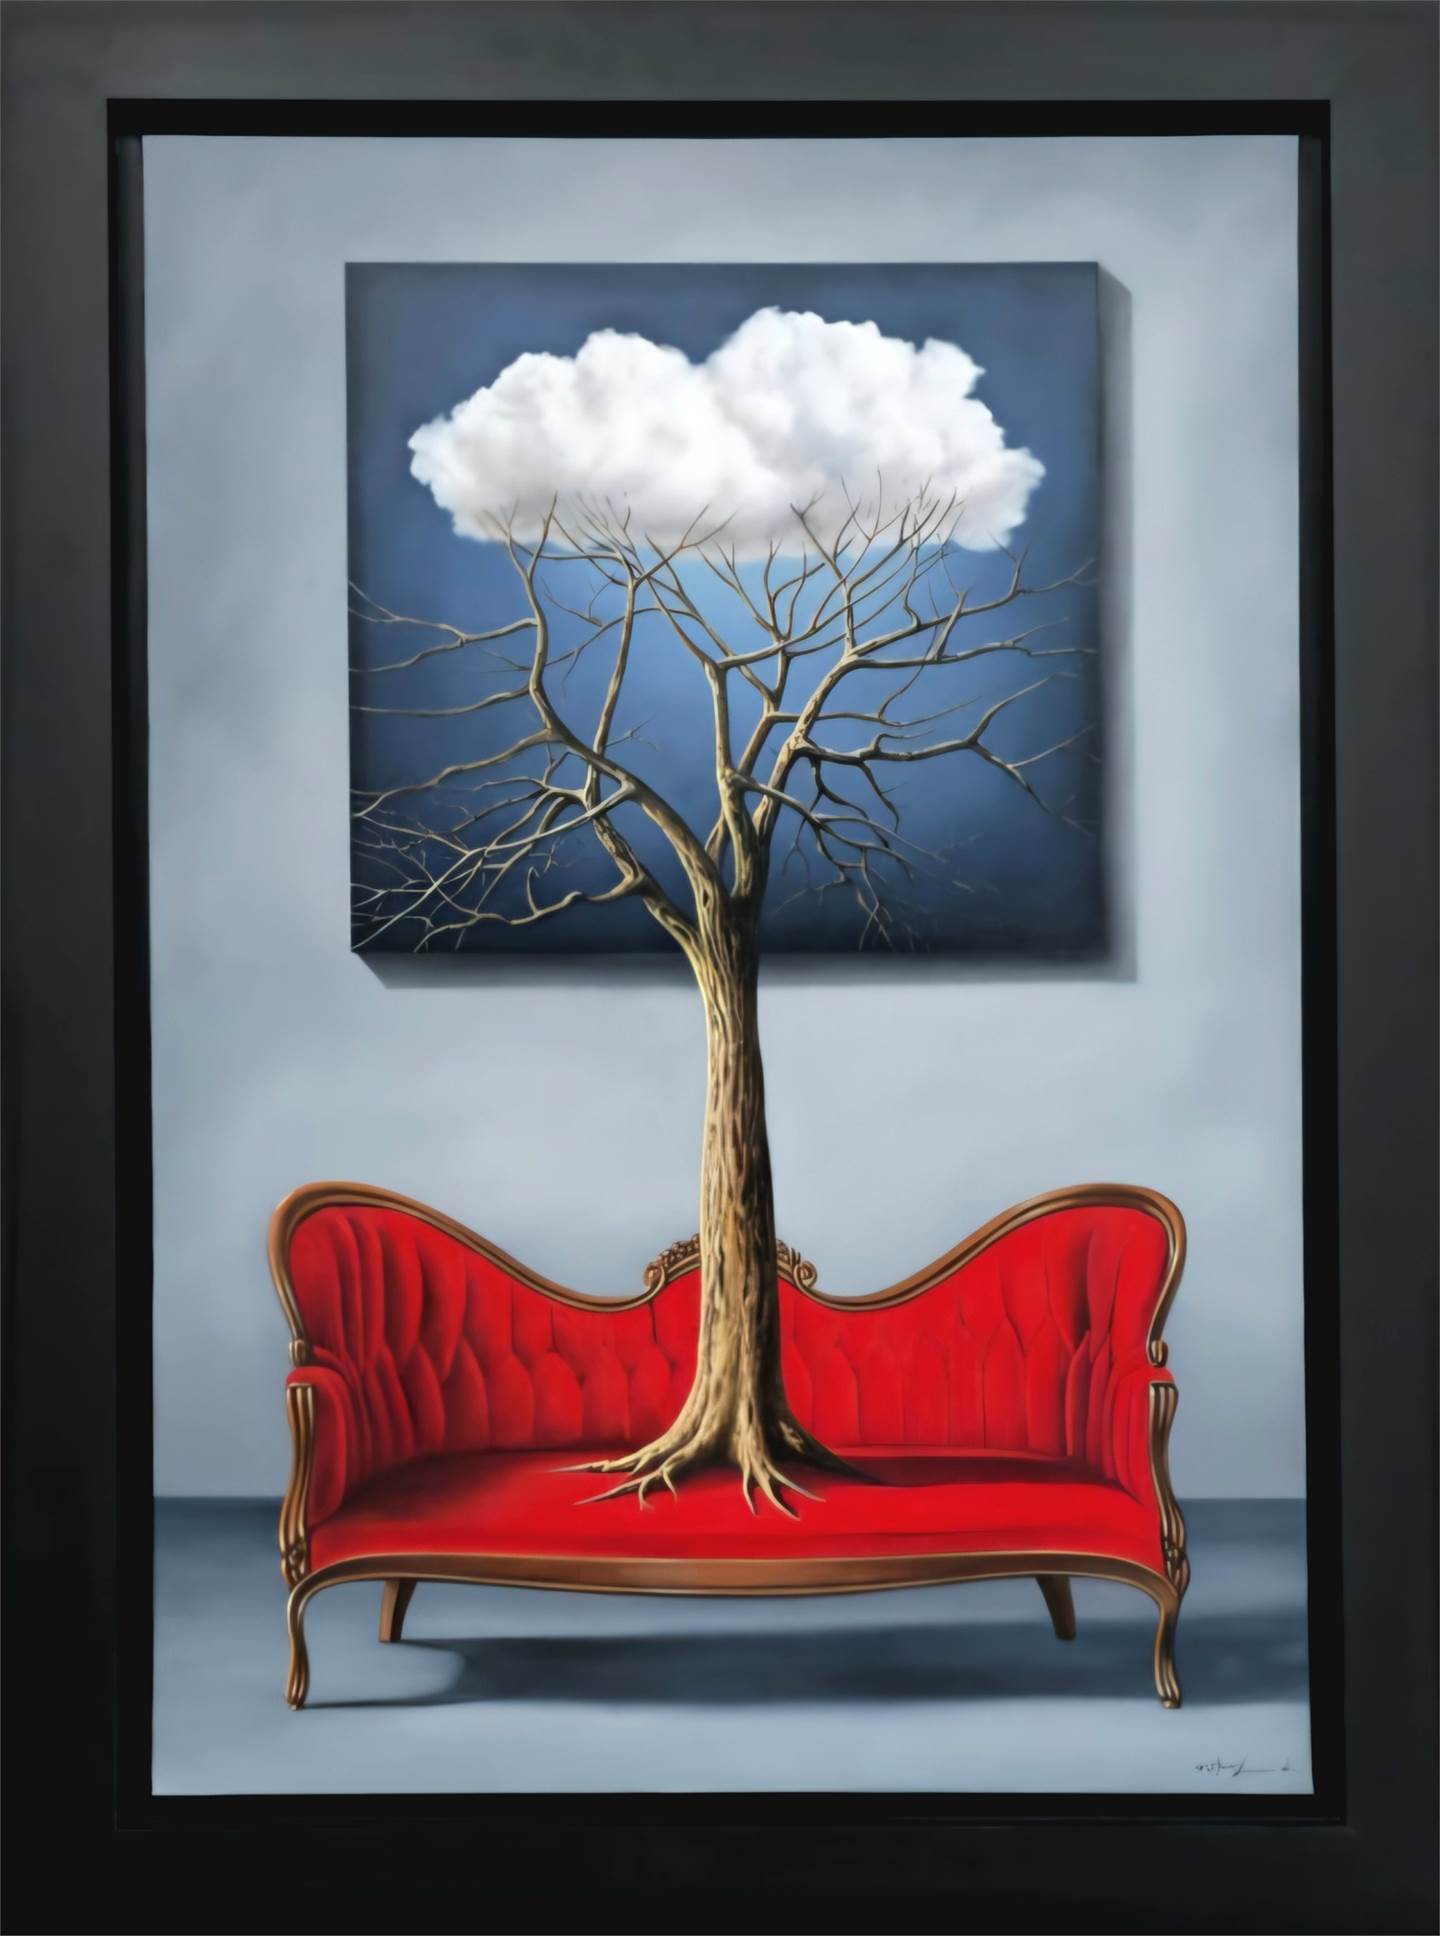 Relaxing in the Clouds, original Landscape Oil Painting by Gustavo Fernandes